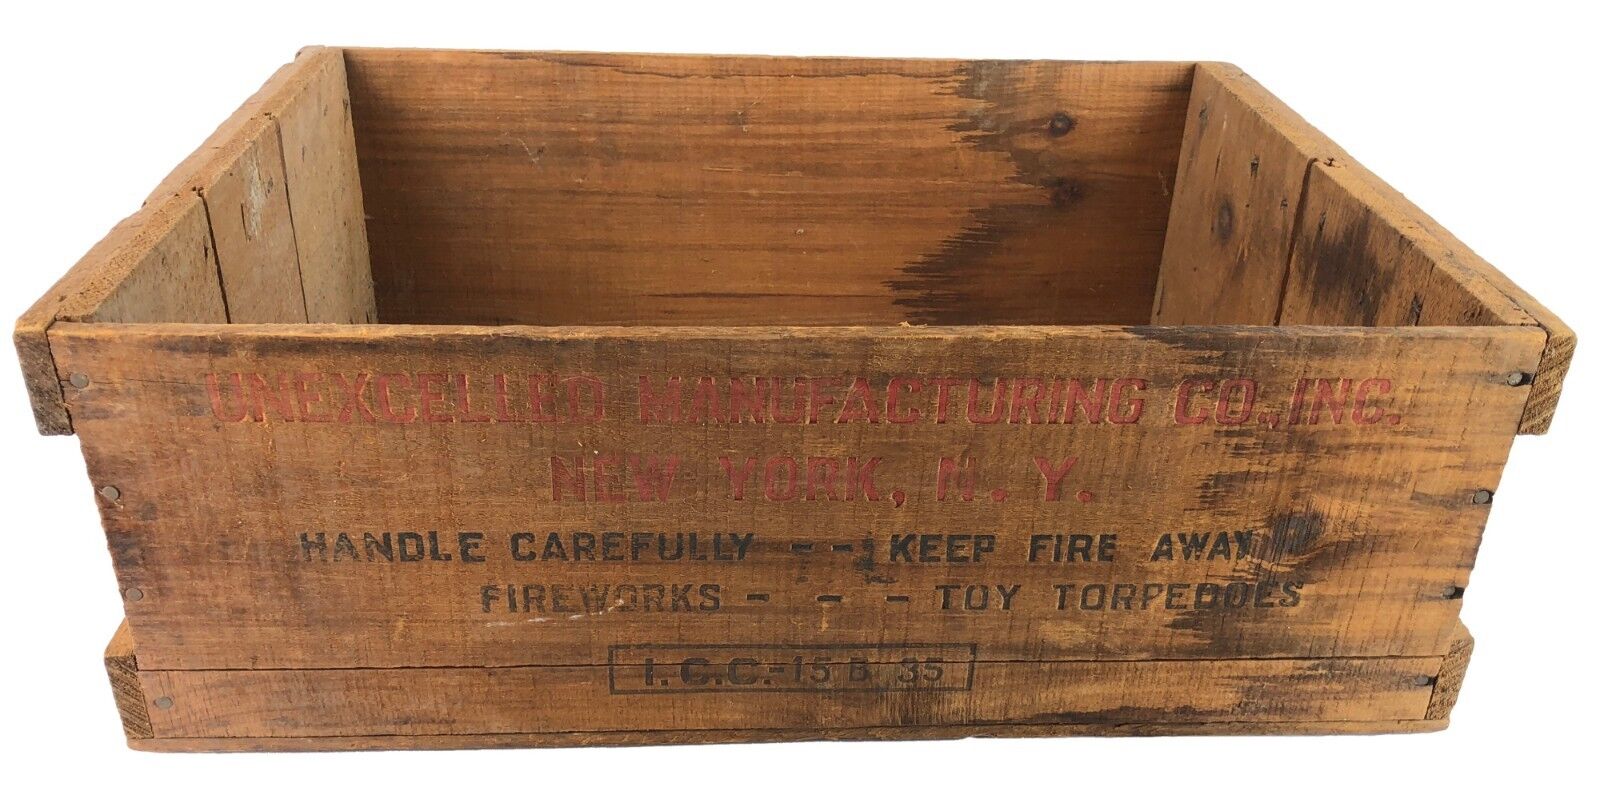 UNXLD Flash Torpedoes Unexcelled New York 5 Gross Vintage Wood Fireworks Crate